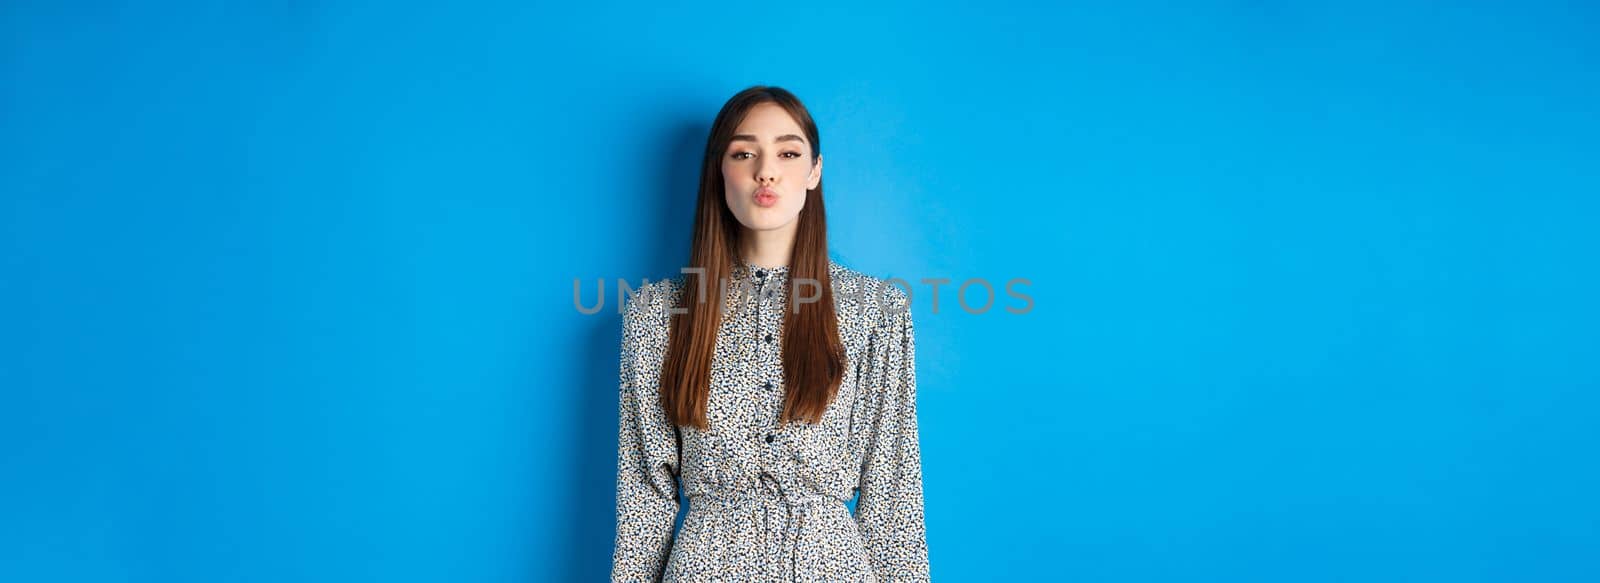 Valentines day and relationship concept. Lovely woman in dress pucker lips for kiss, looking with love at at camera, standing on blue background.